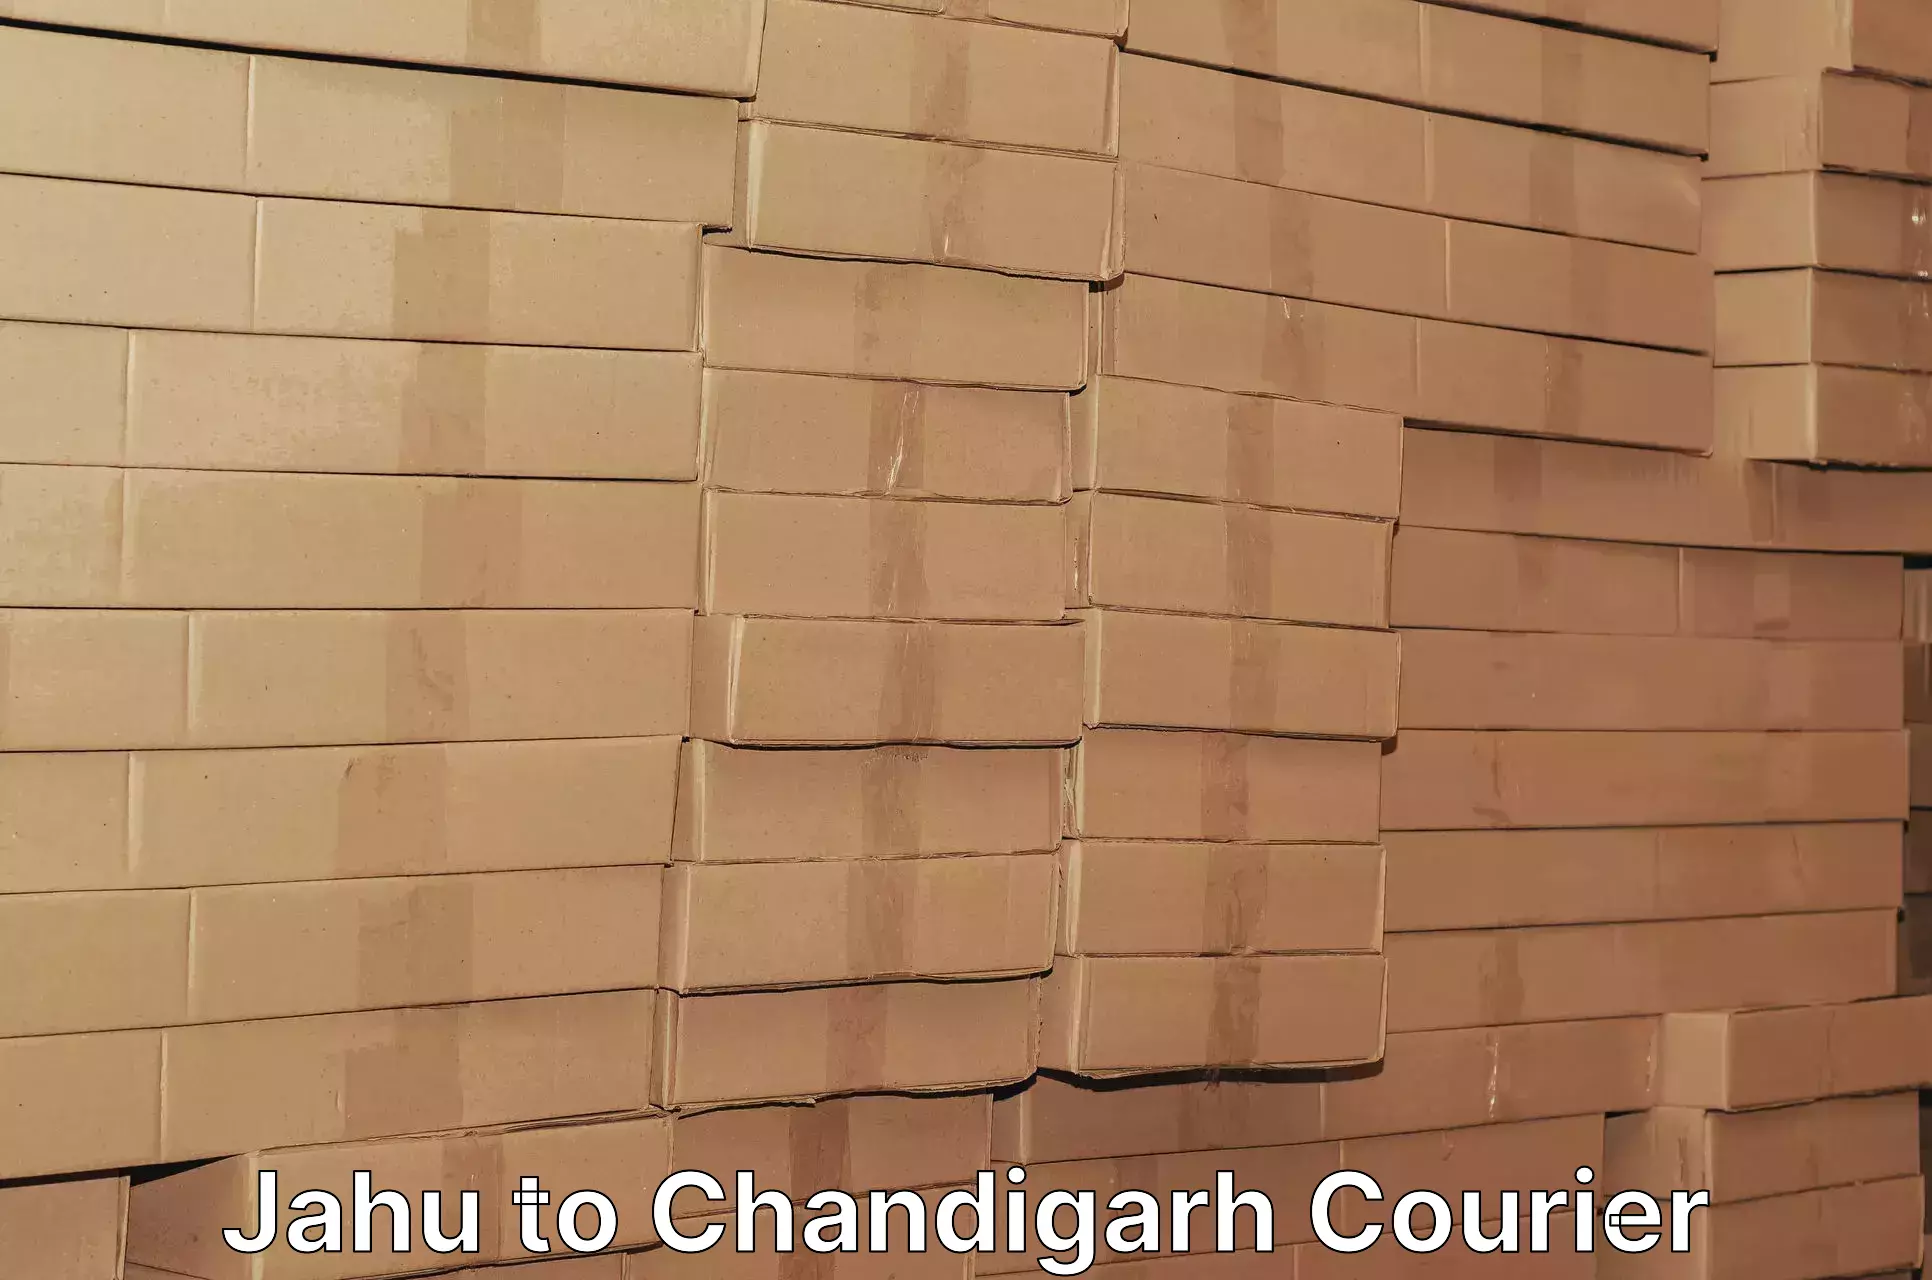 User-friendly delivery service Jahu to Chandigarh